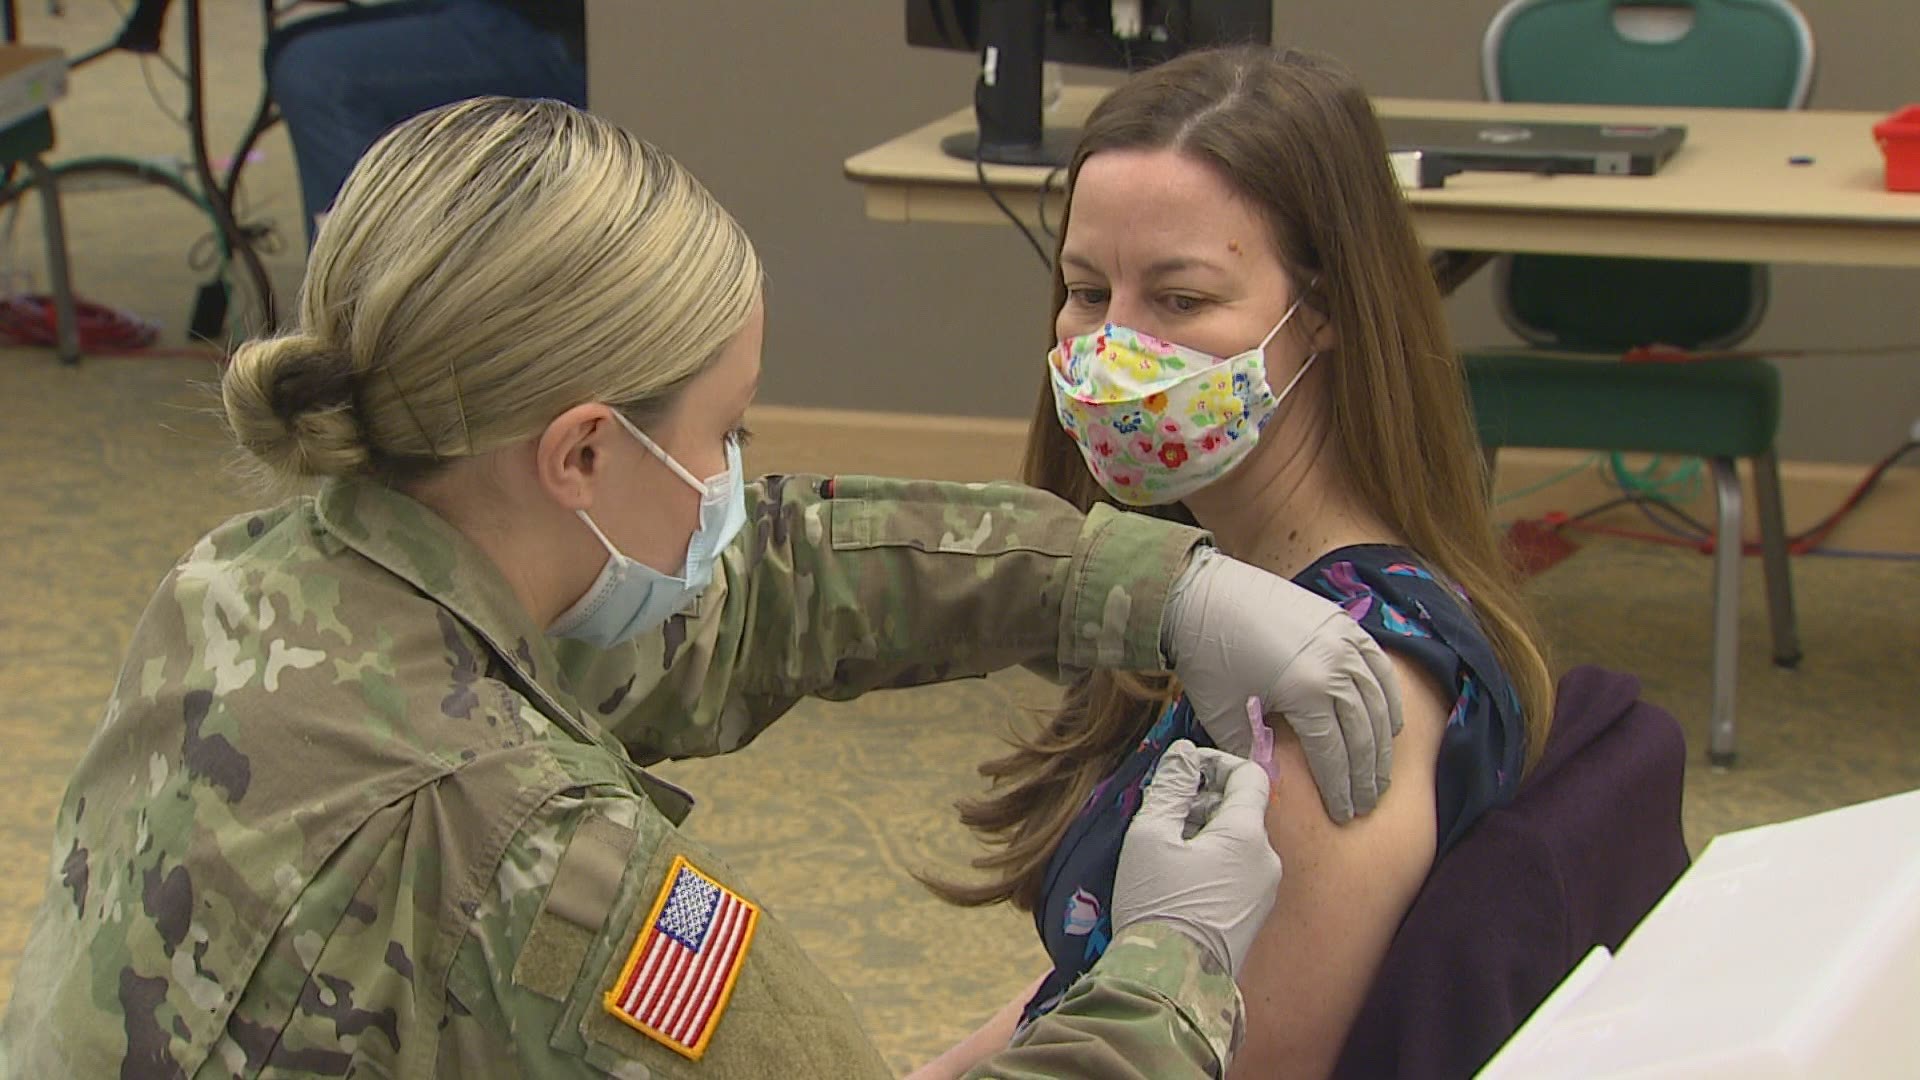 Governor Inslee says that those who received their vaccine through the military are not eligible for the state's first lottery drawing. He wants that to change.